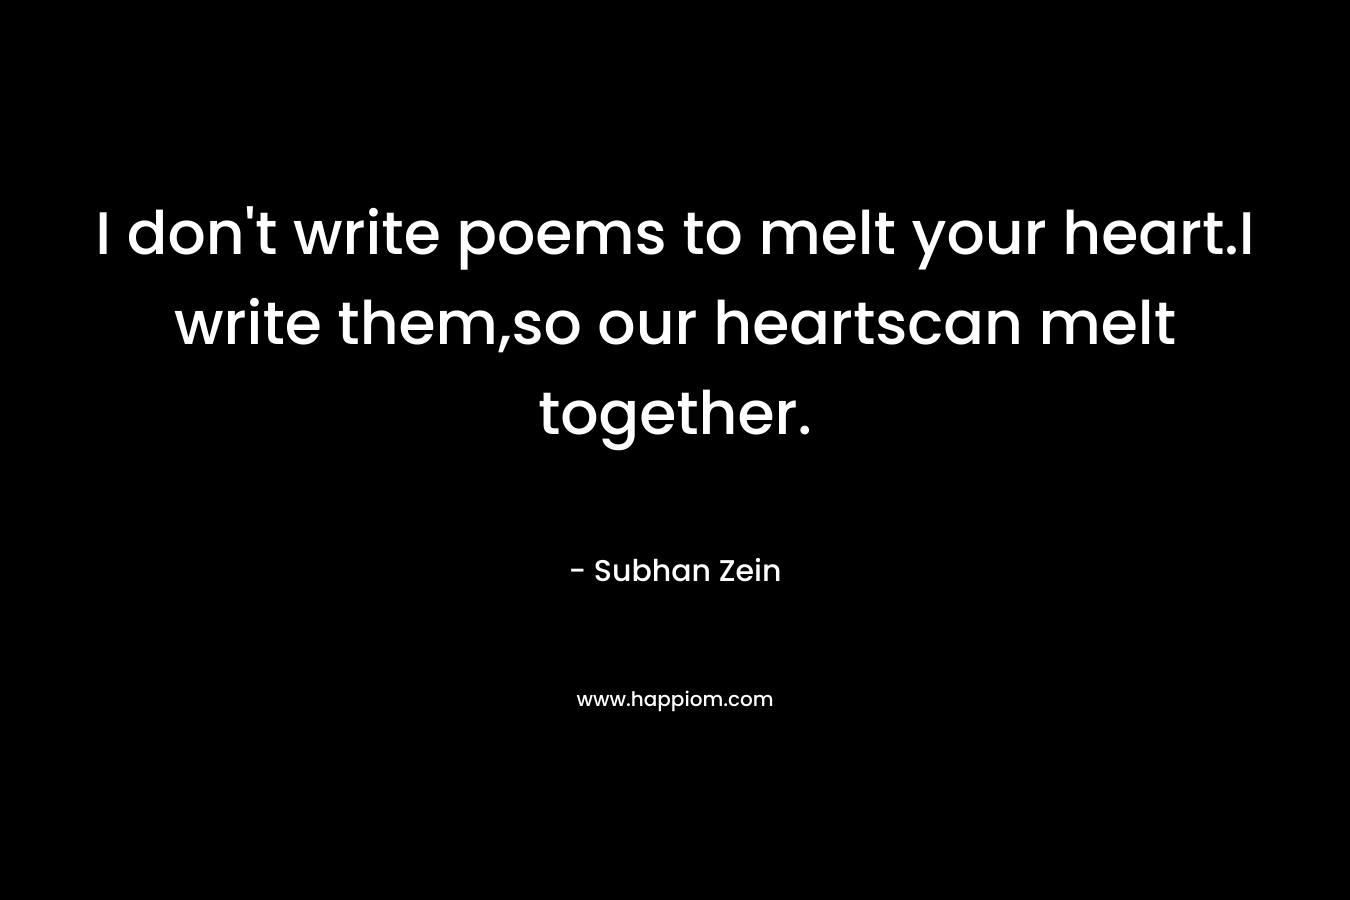 I don't write poems to melt your heart.I write them,so our heartscan melt together.